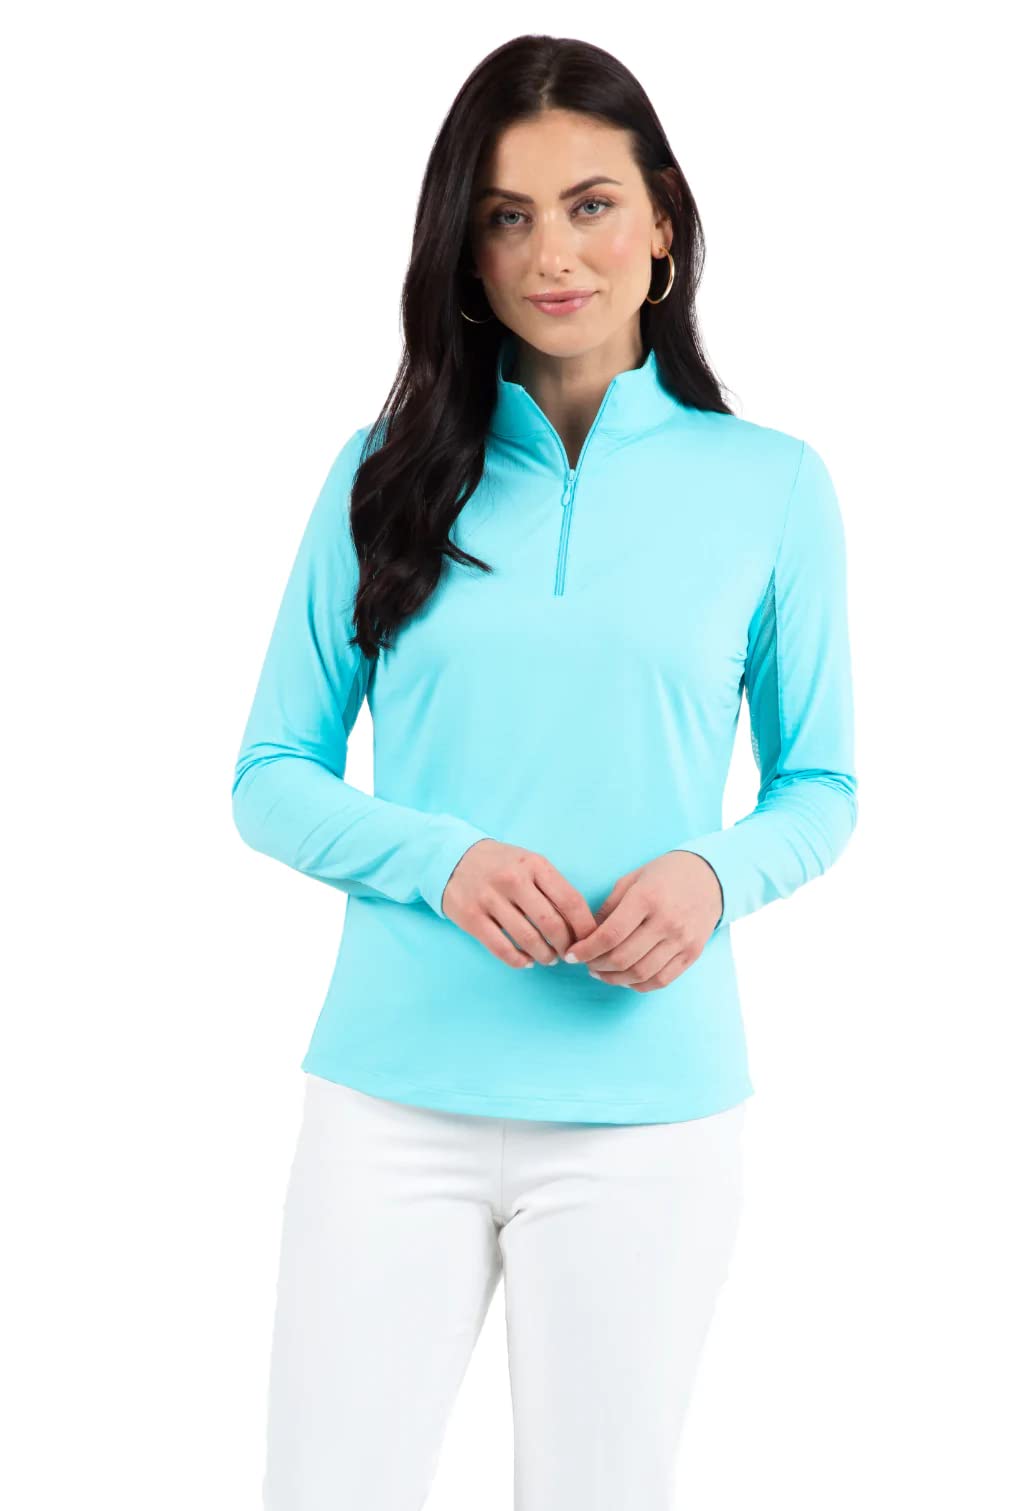 IBKUL Athleisure Wear Sun Protective UPF 50+ Icefil Cooling Tech Long Sleeve Mock Neck Top with Under Arm Mesh 80000 Seafoam Solid S